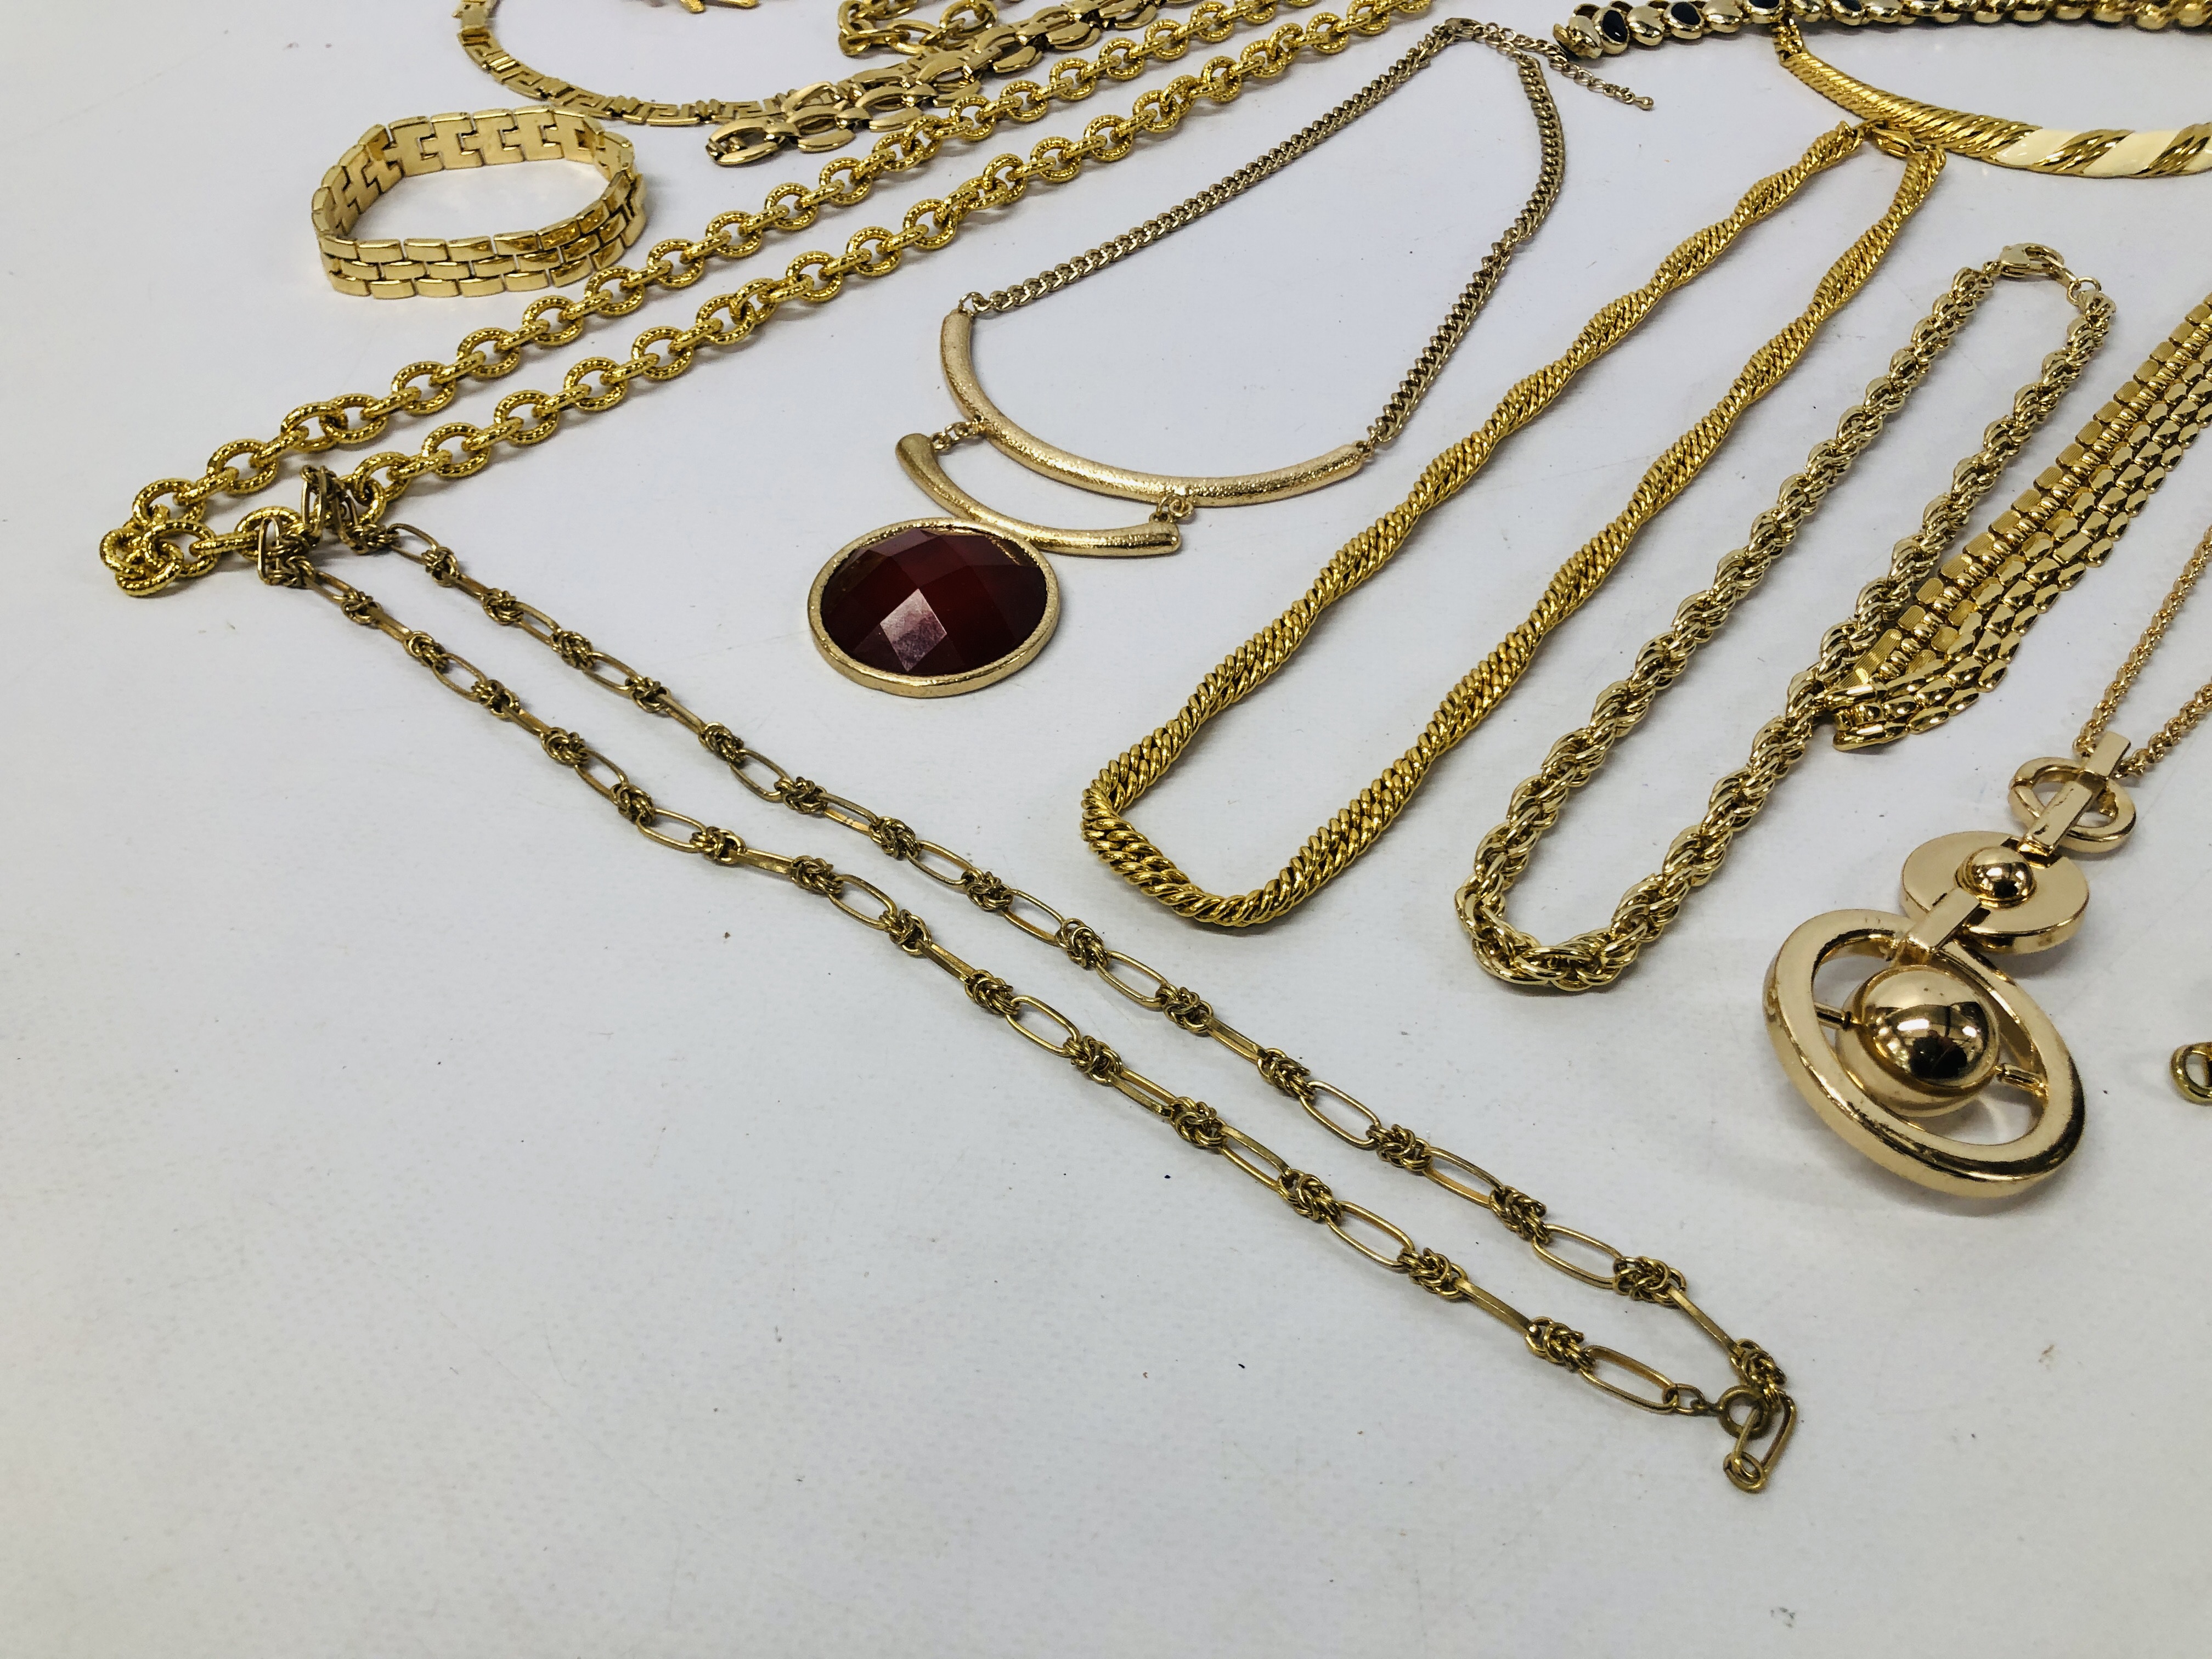 COLLECTION OF DESIGNER COSTUMER JEWELLERY, NECKLACES OF GOLD COLOUR VARIOUS DESIGNS AND LENGTH. - Image 6 of 6